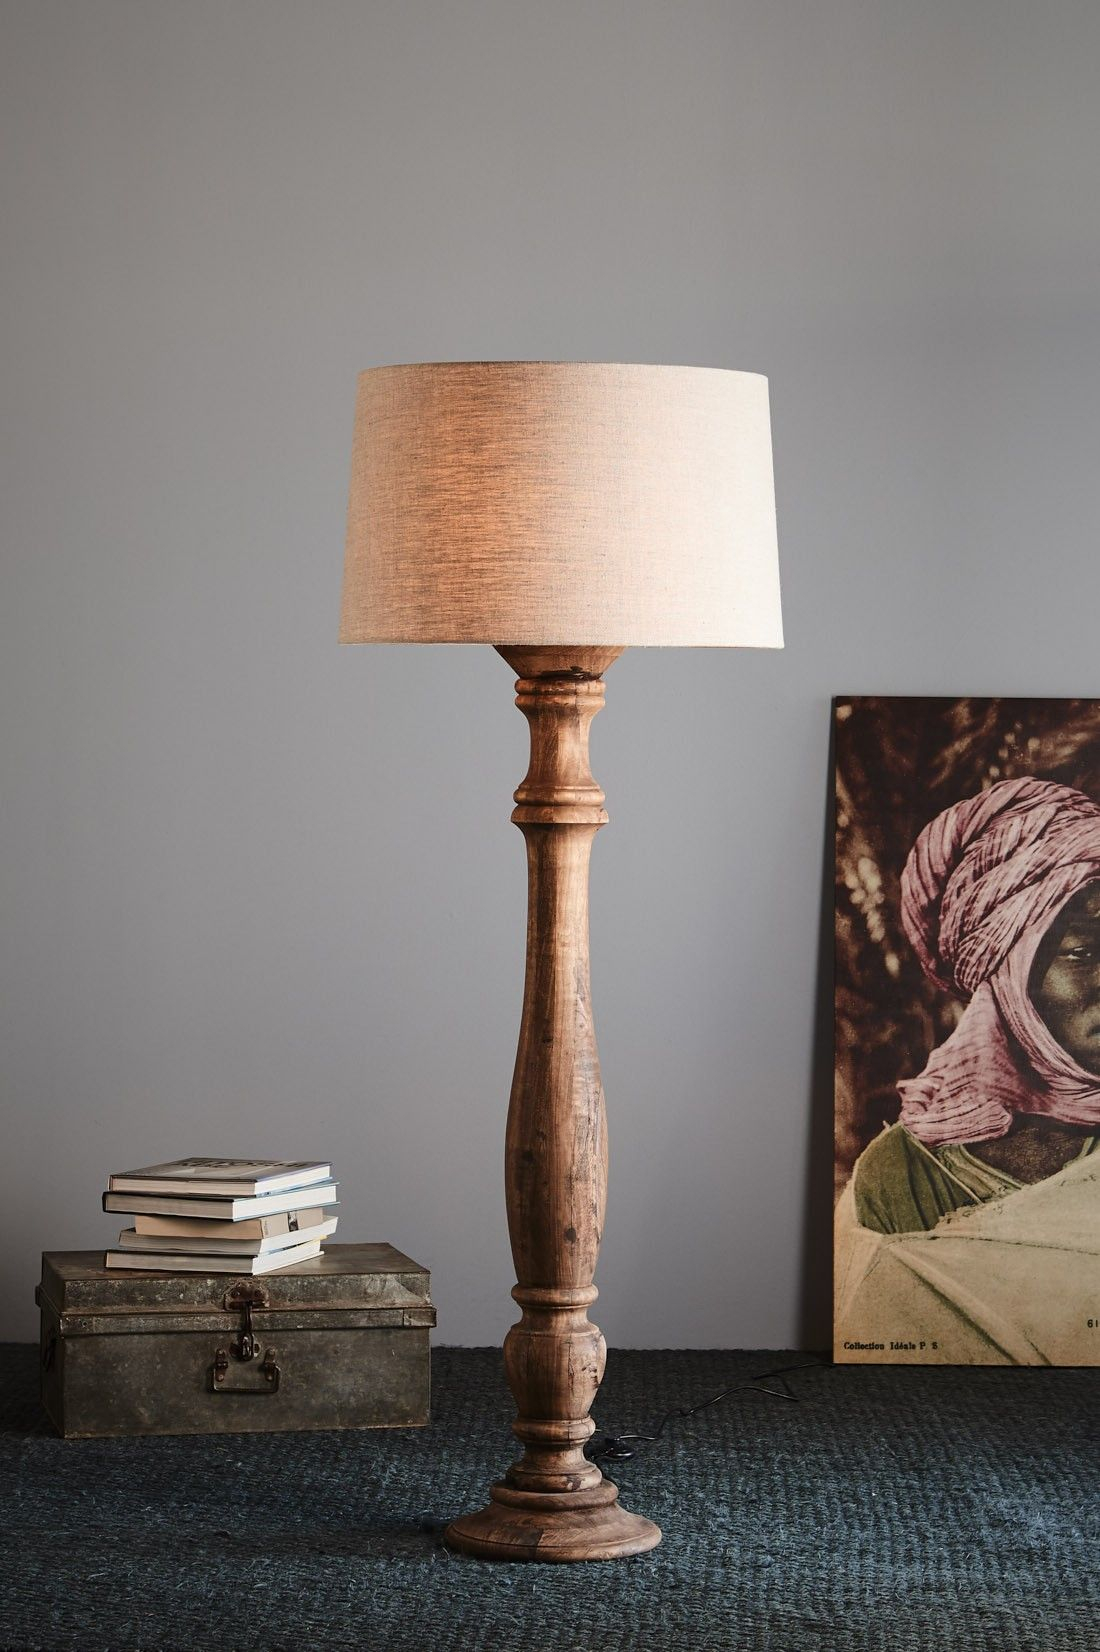 An Elegant Candlestick Style Turned Wood Floor Lamp In A intended for proportions 1100 X 1652